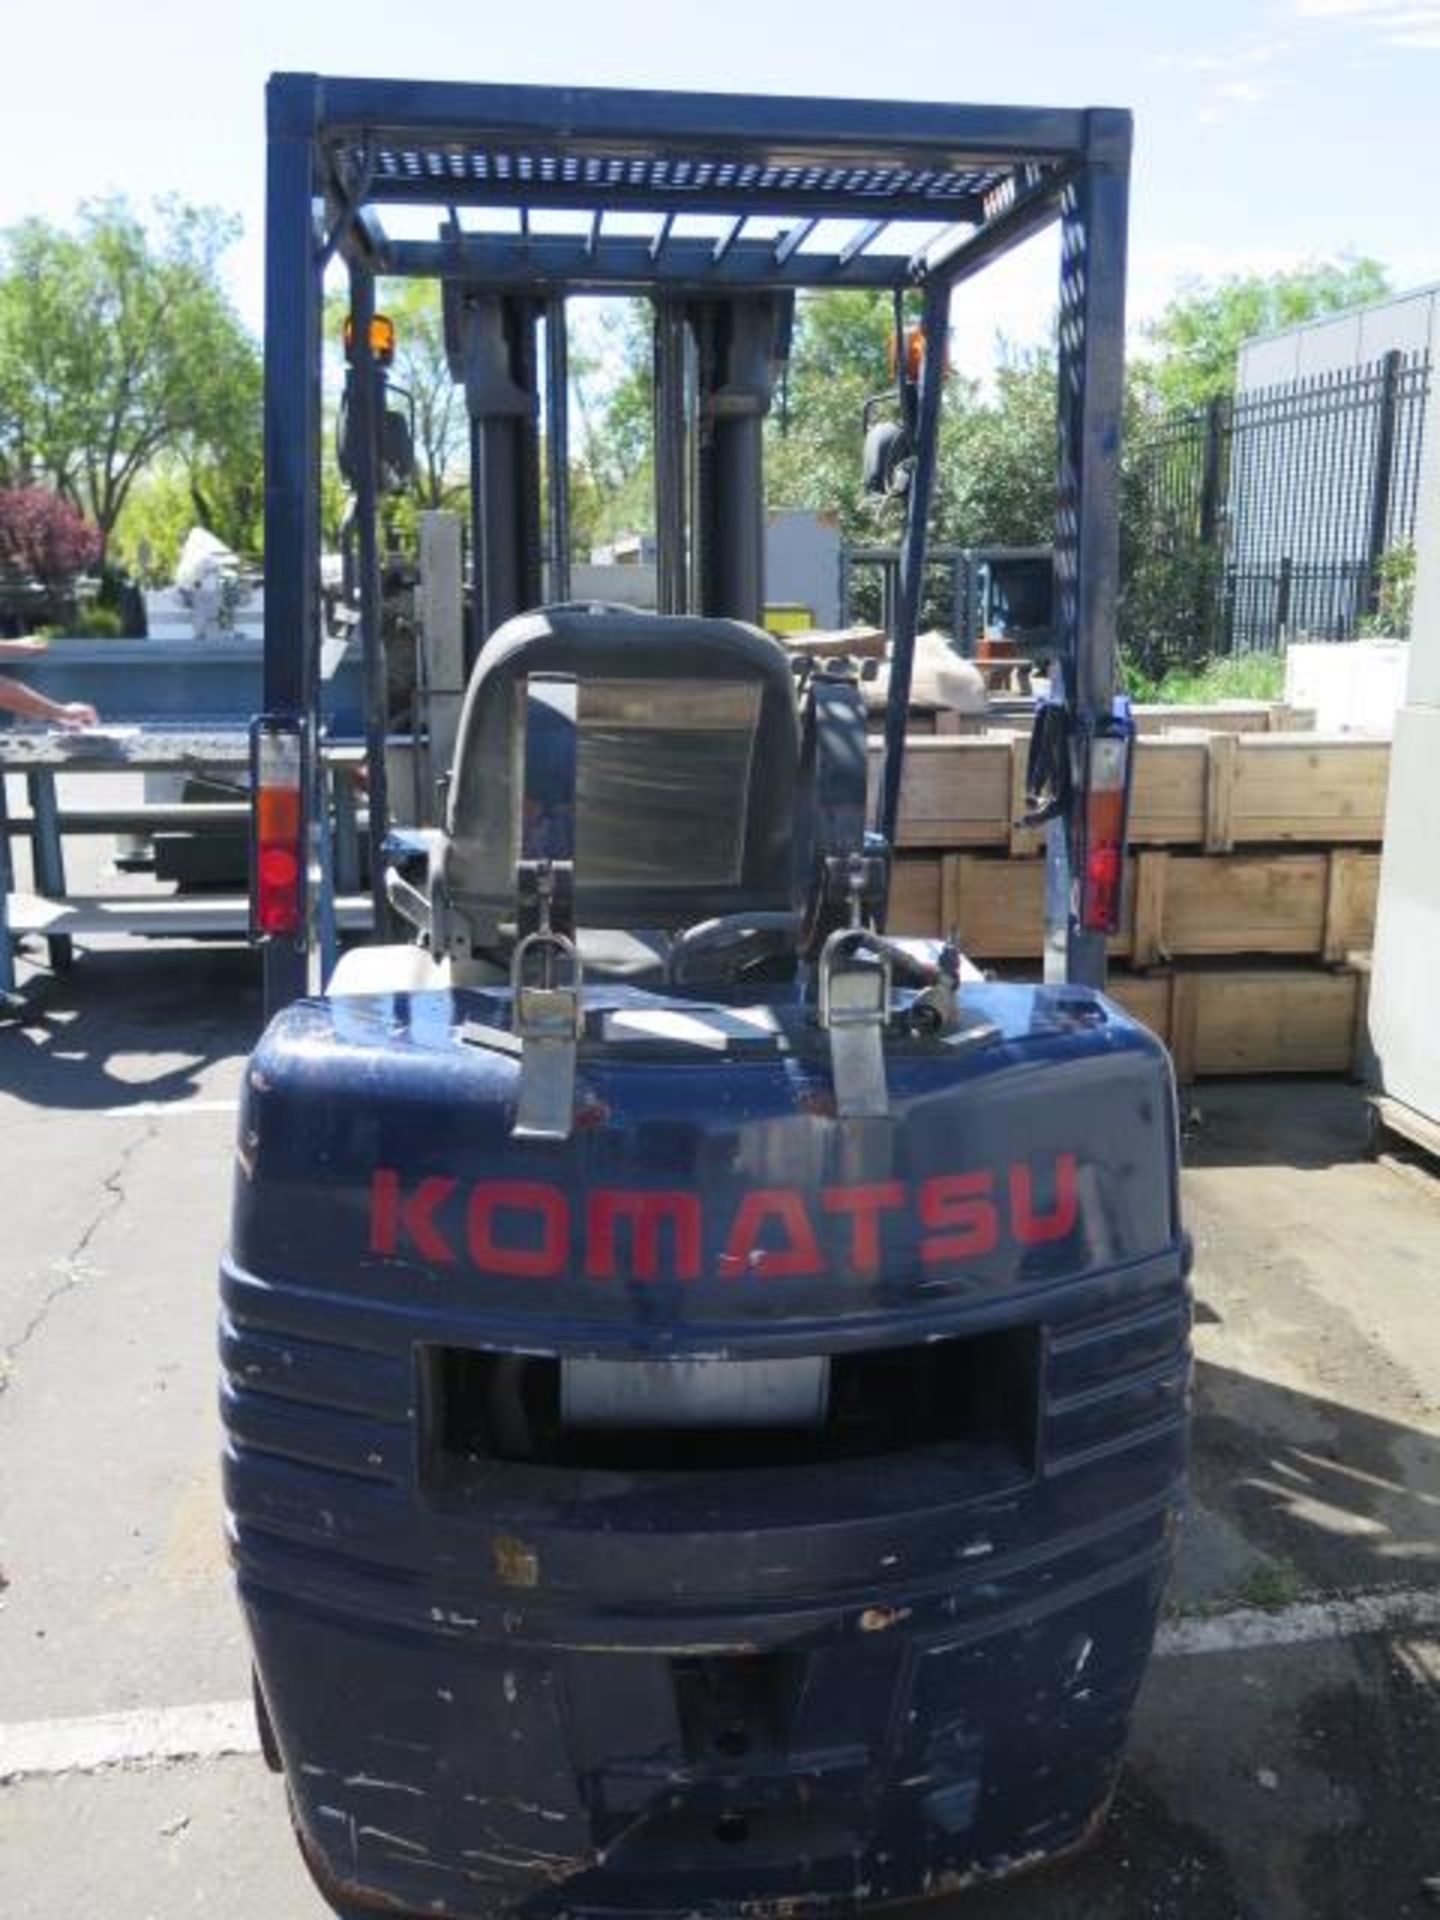 Komatsu 5000 Lb Cap LPG Forklift w/ 3-Stage Mast, Side Shift, 4th Actuator Lever, SOLD AS IS - Image 3 of 21